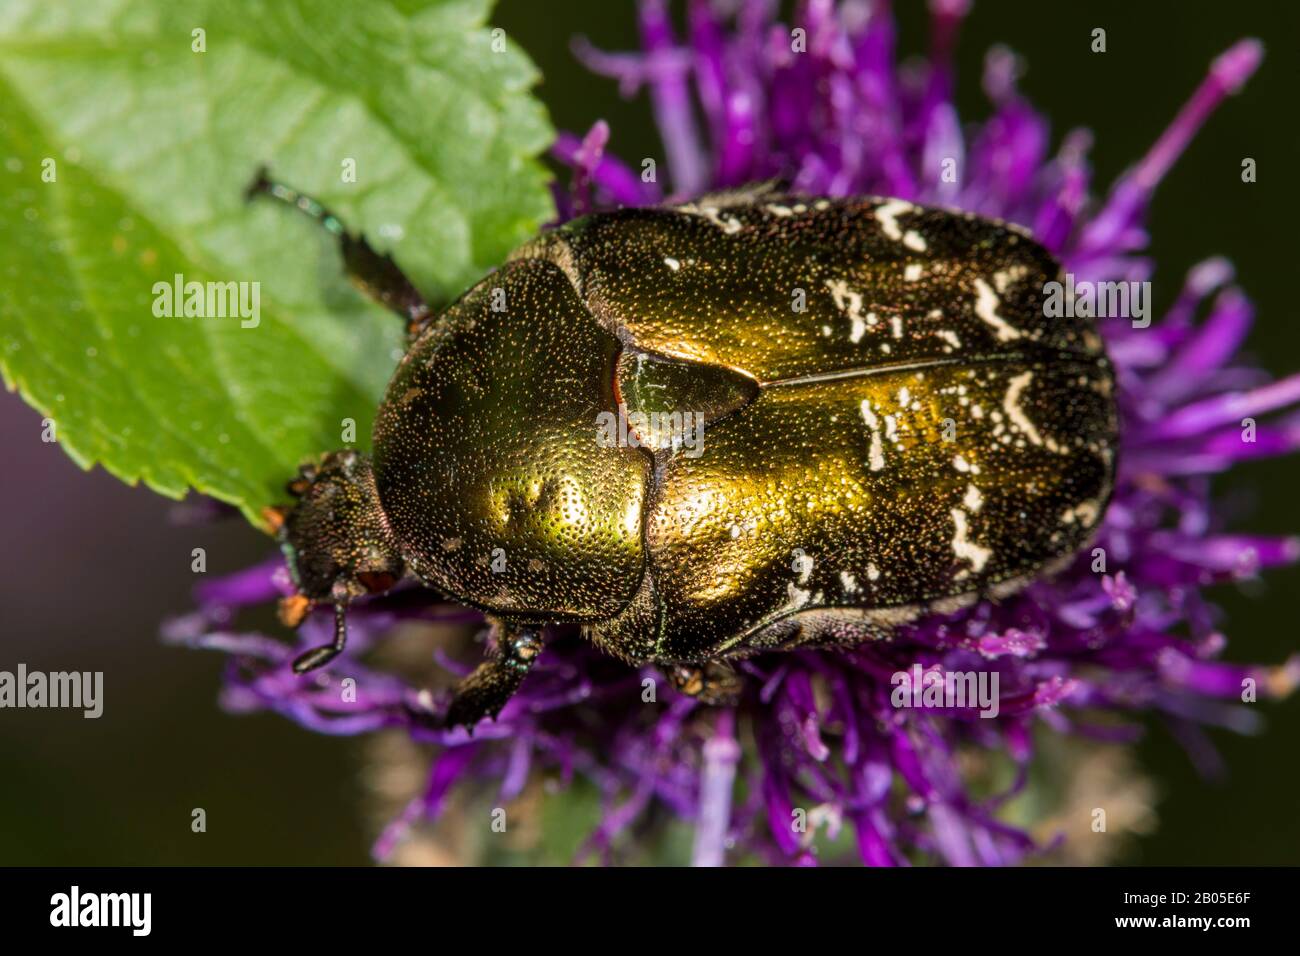 rose chafer (Cetonia aurata), sitting on a blossom, view from above, Germany Stock Photo